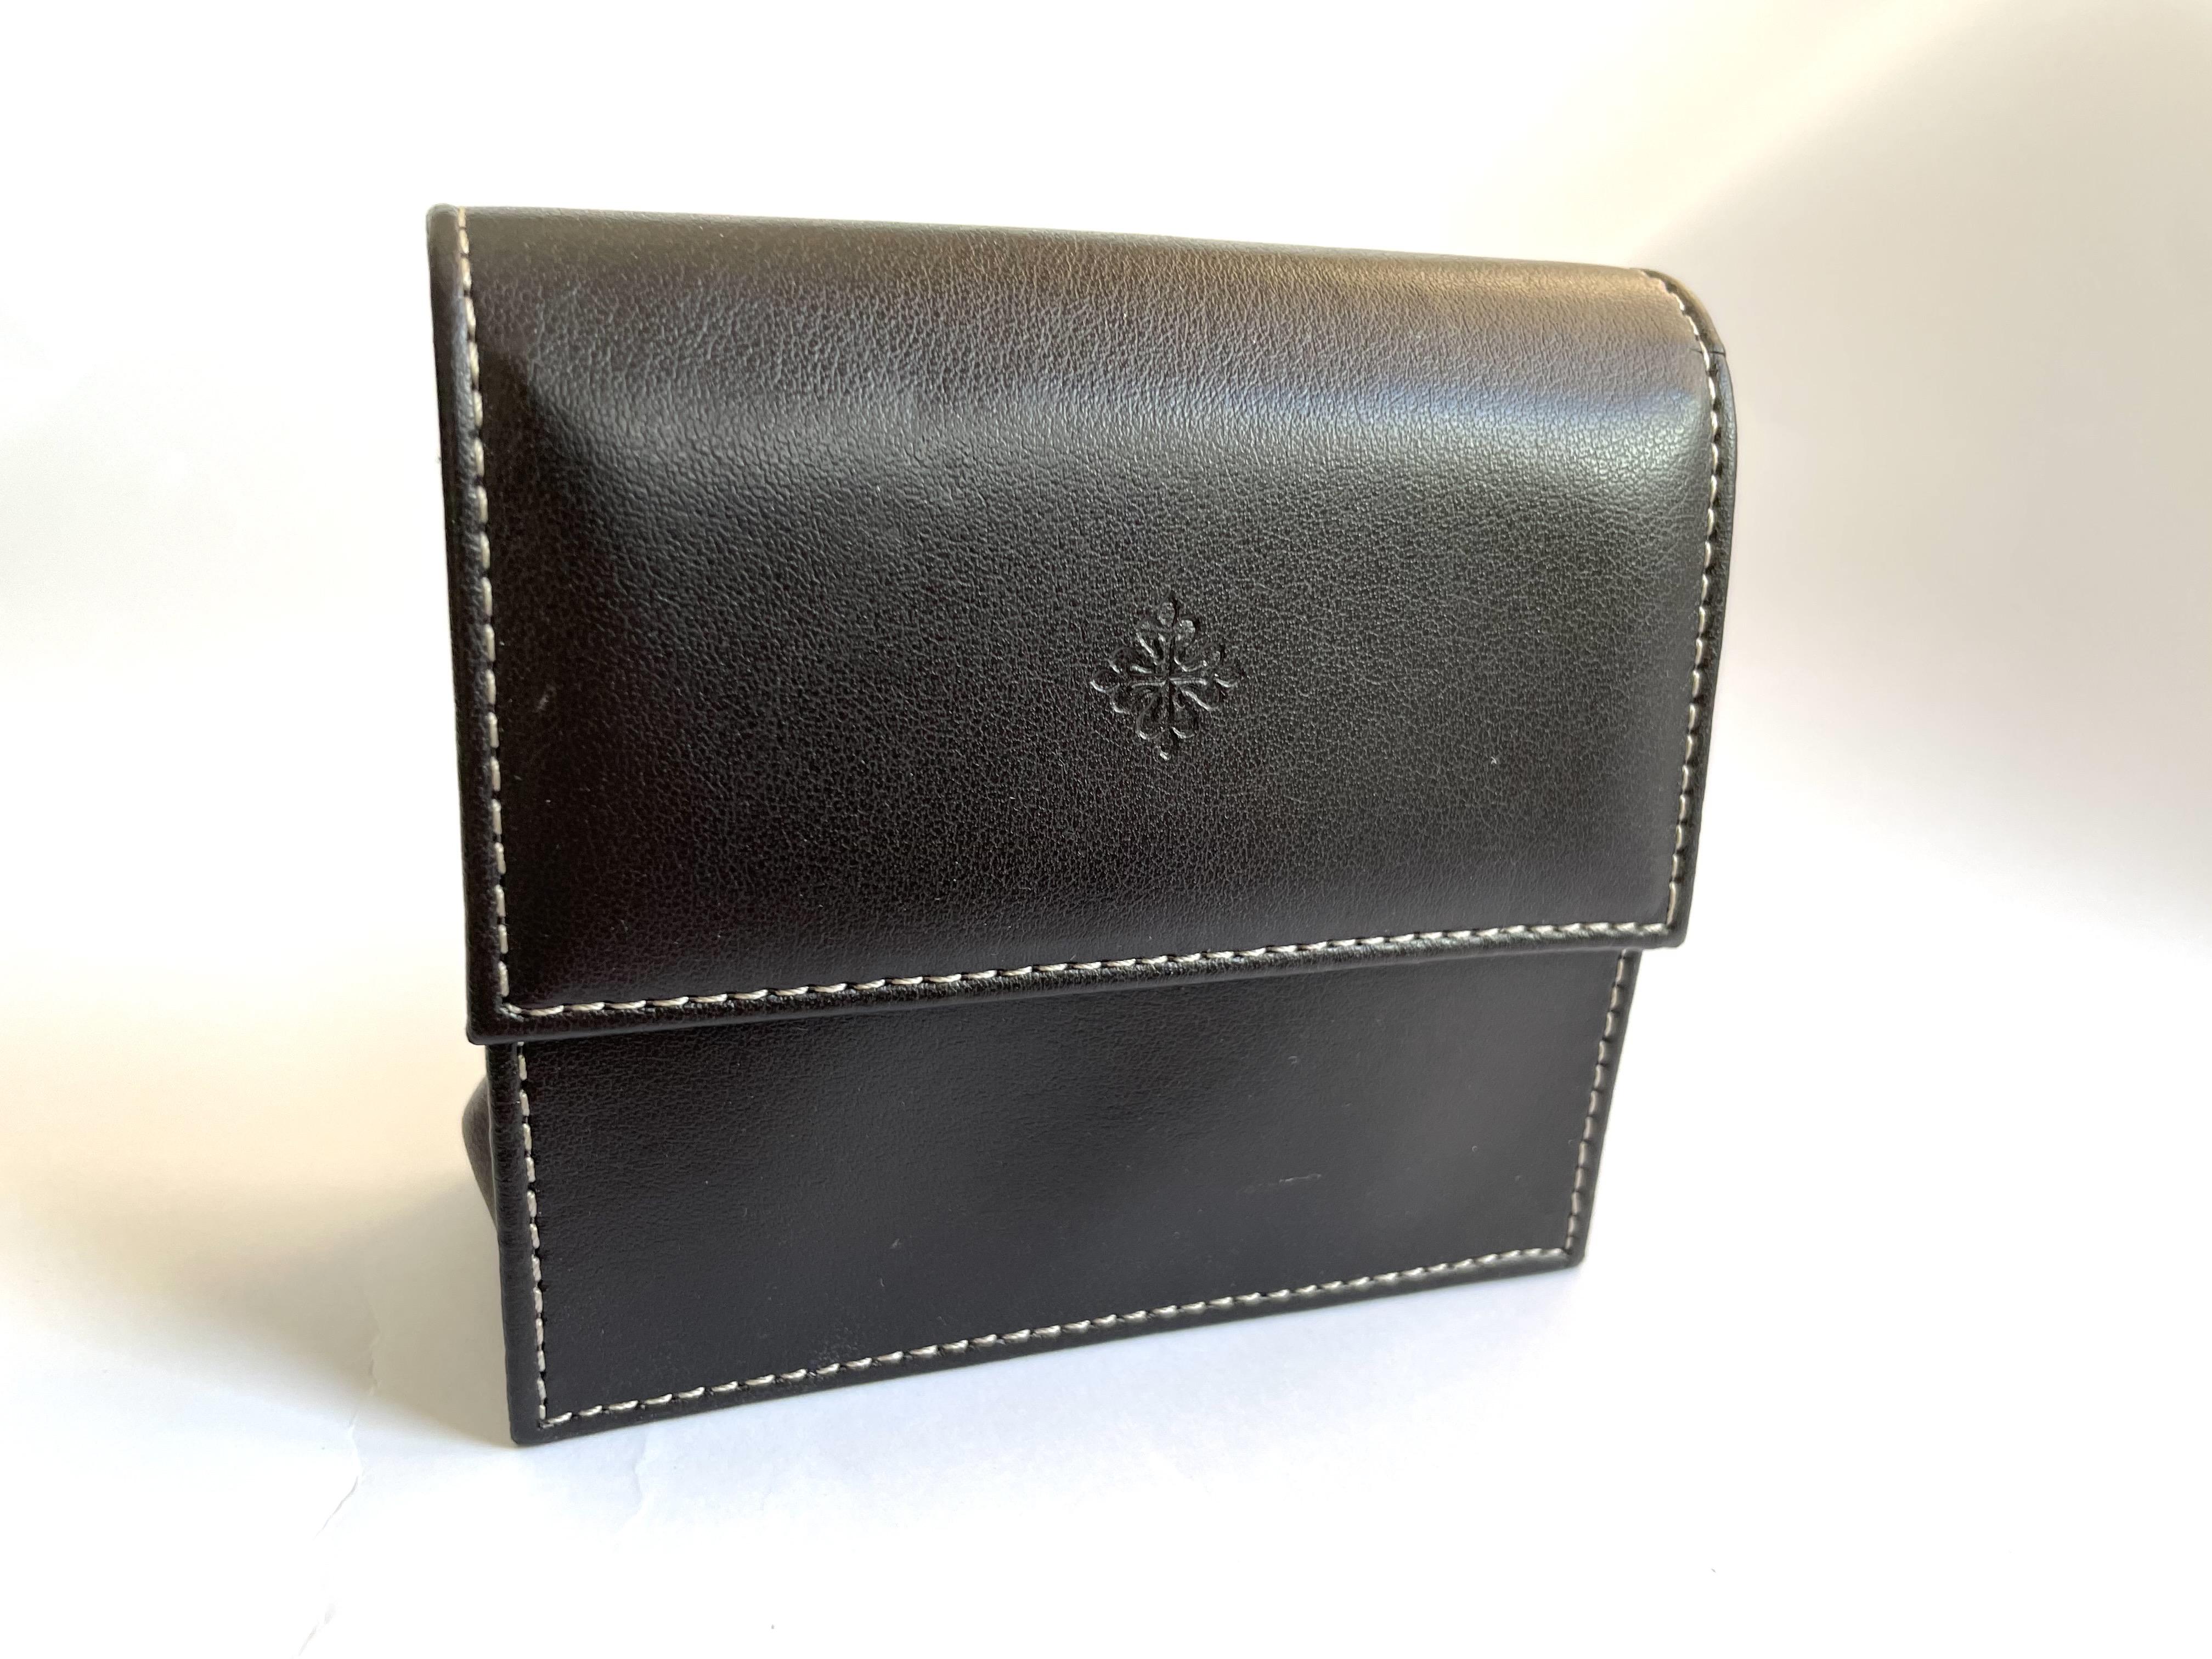 New Patek Philippe leather travel watch pouch case - Patek Philippe